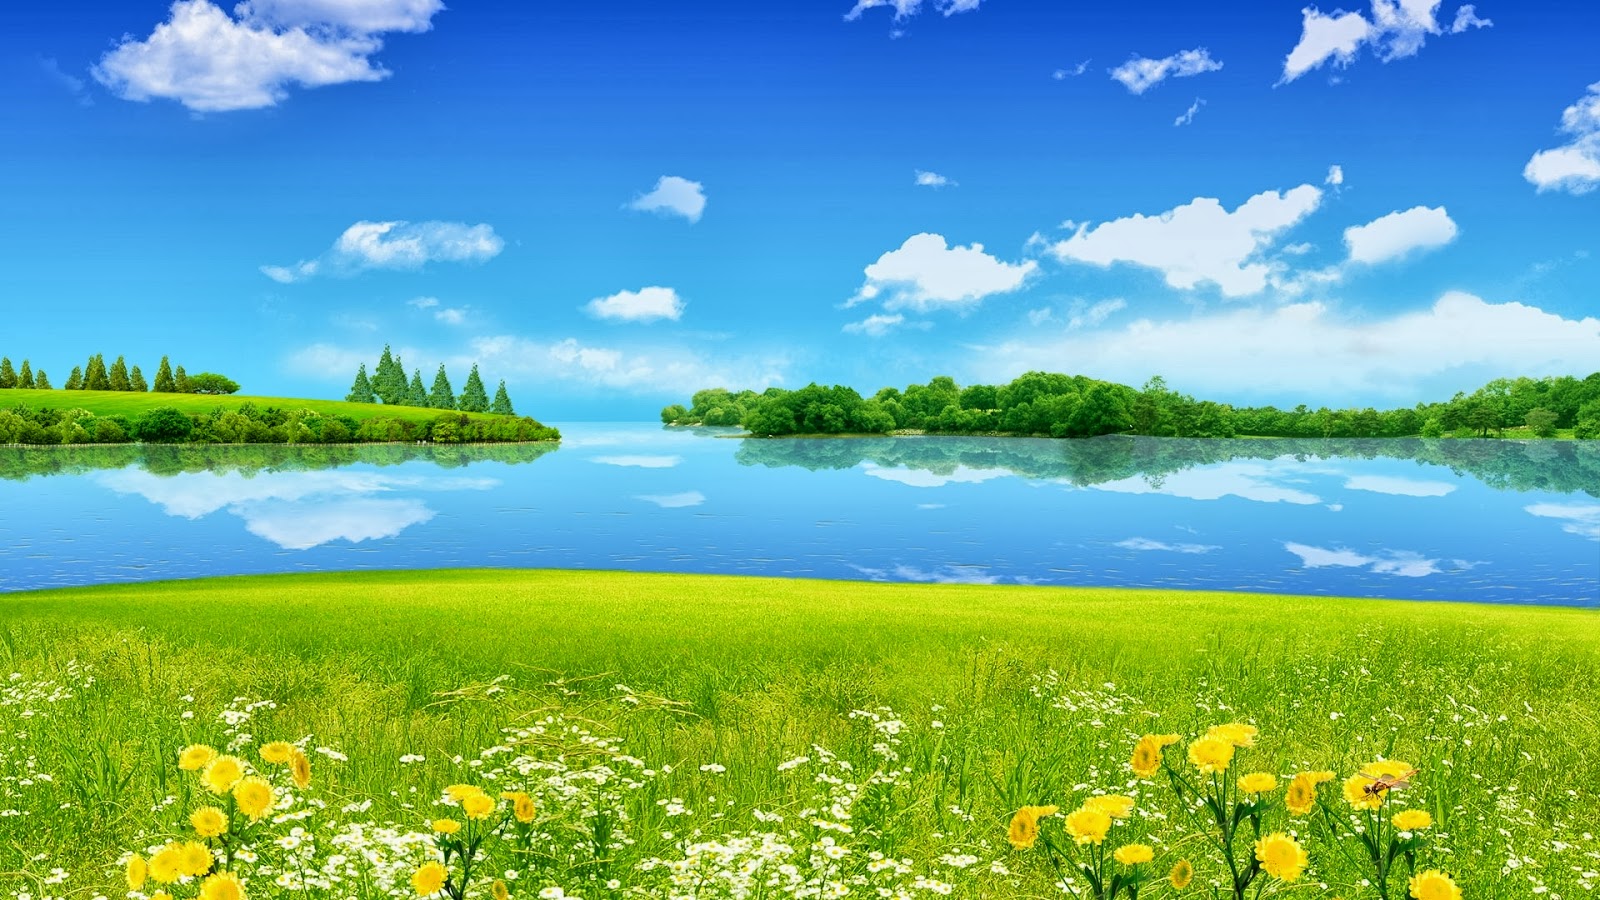  HD Nature Wallpapers Download For Laptop PC Desktop Background 1600x900